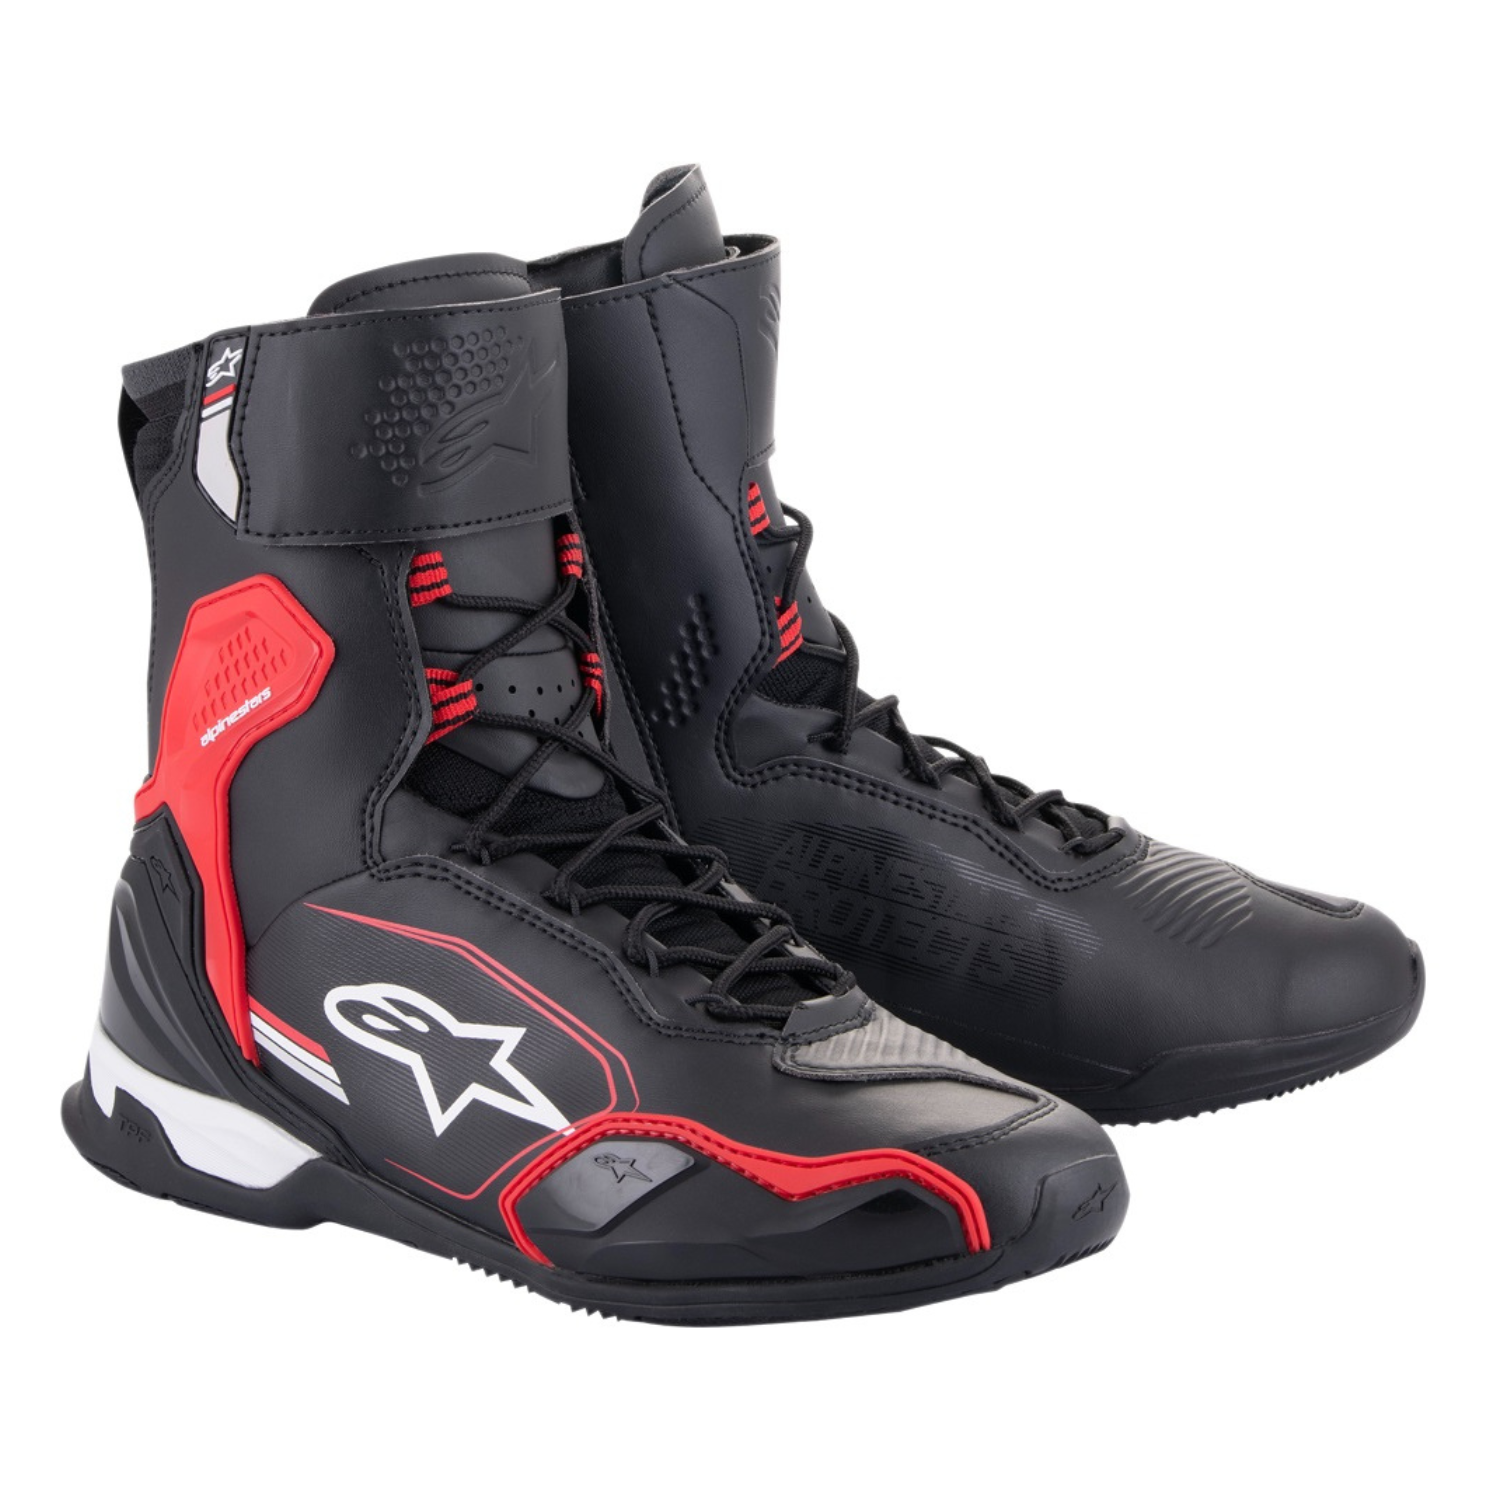 Image of Alpinestars Superfaster Shoes Black Bright Red White Taille US 10